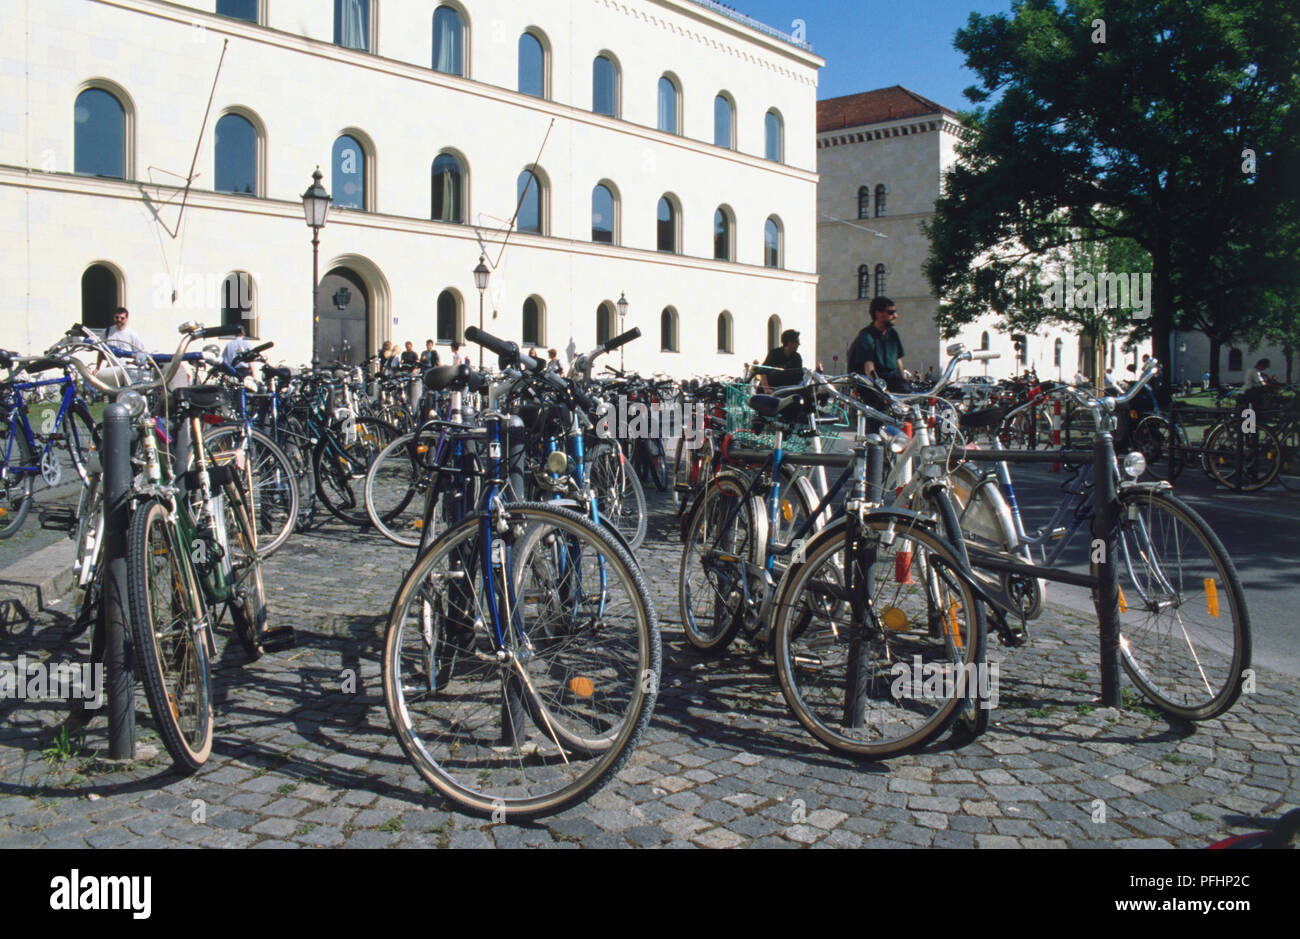 Germany, Bavaria, Munich, large group of bicycles chained to metal posts in bicycle street parking. Stock Photo